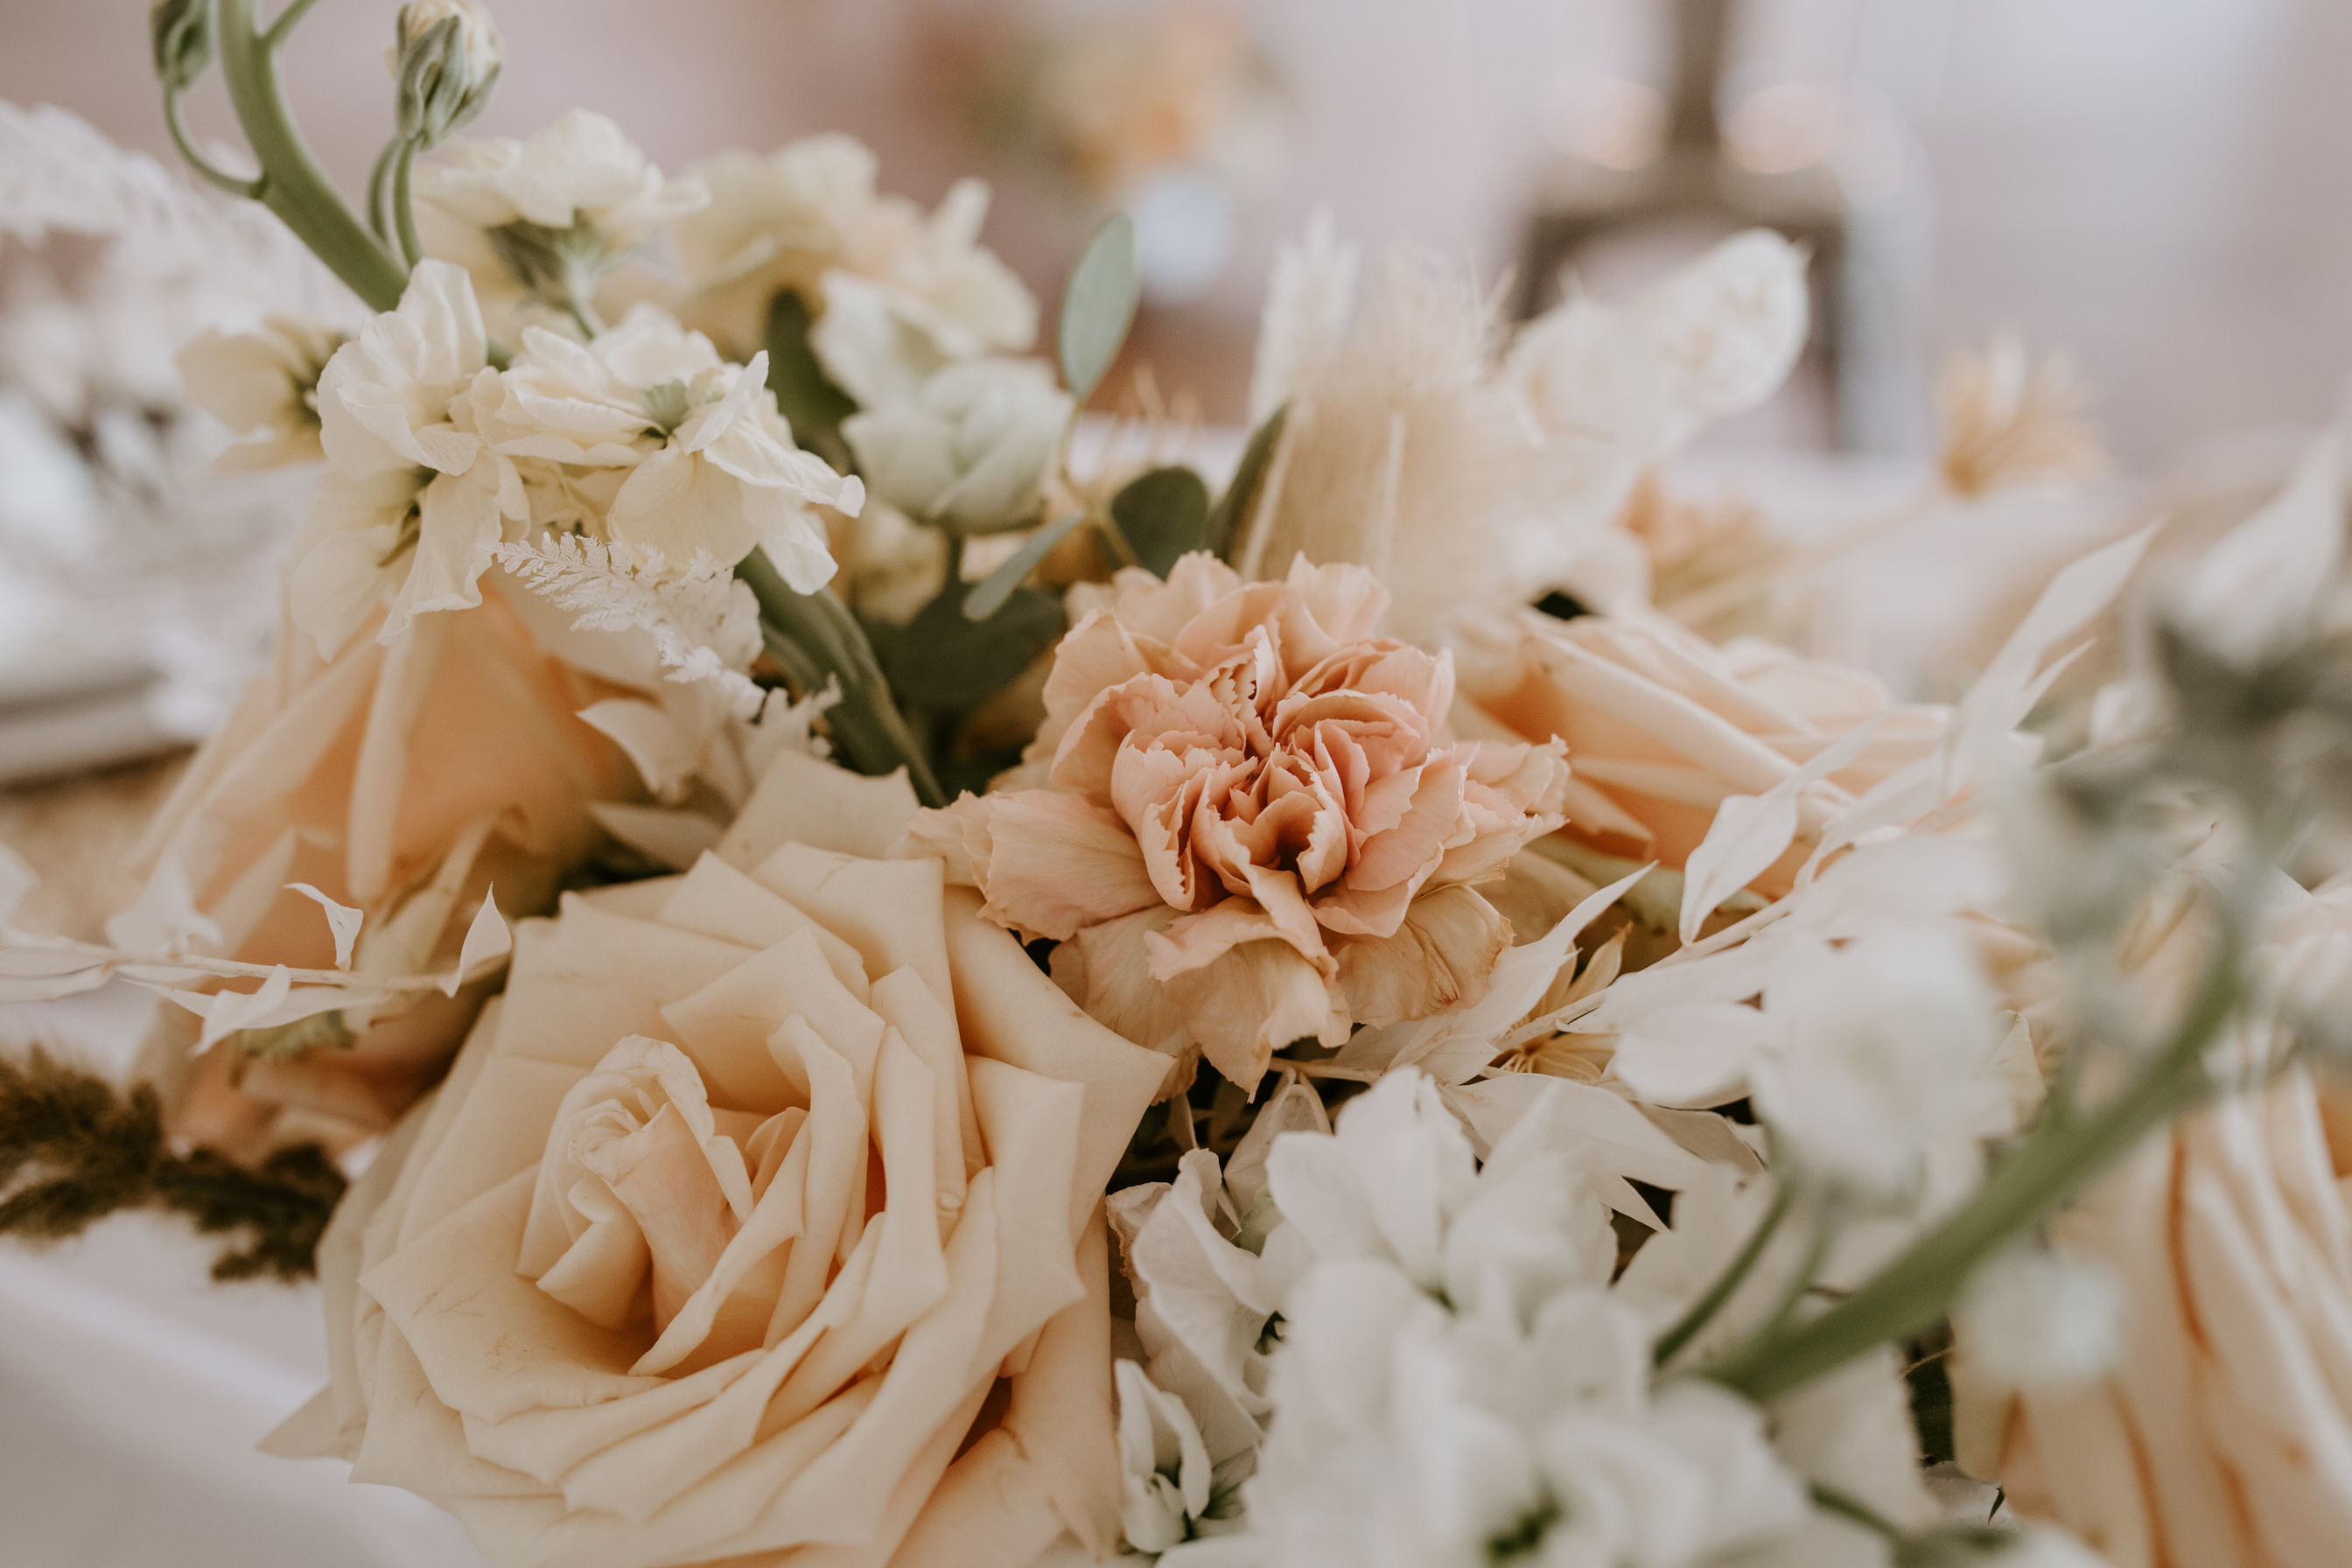 Bouquet of fresh flowers decorating wedding table